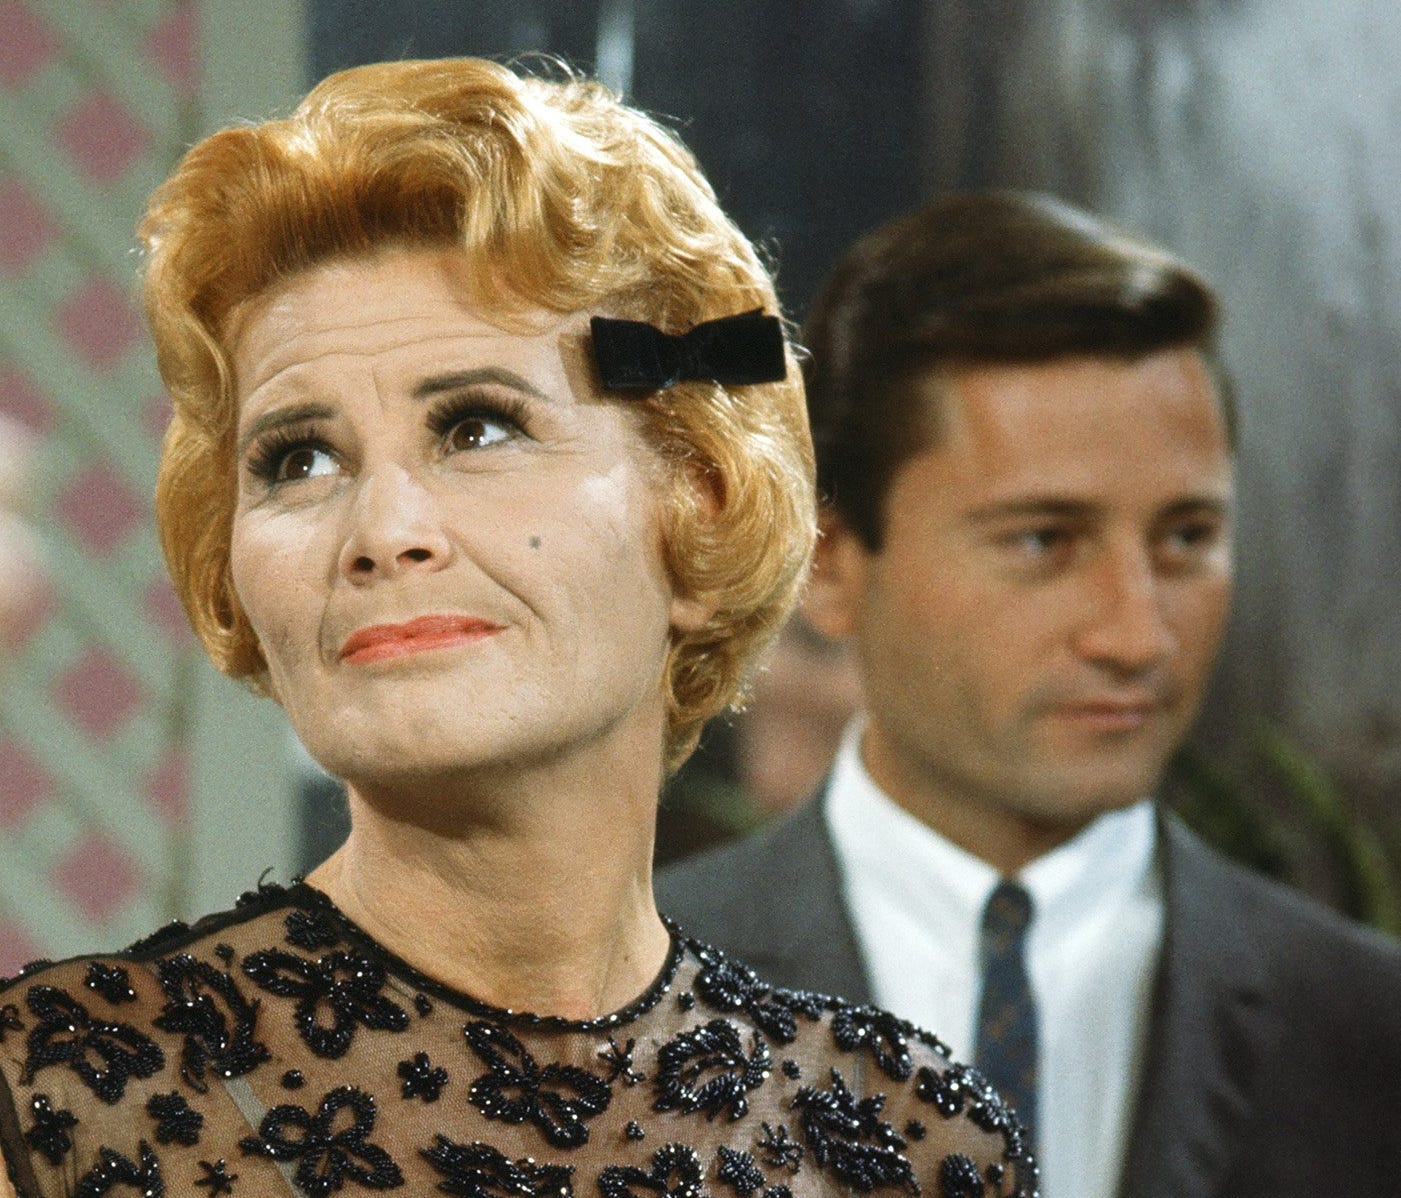 Actress Rose Marie, seen here 1966 on 'The Dean Martin Show.'